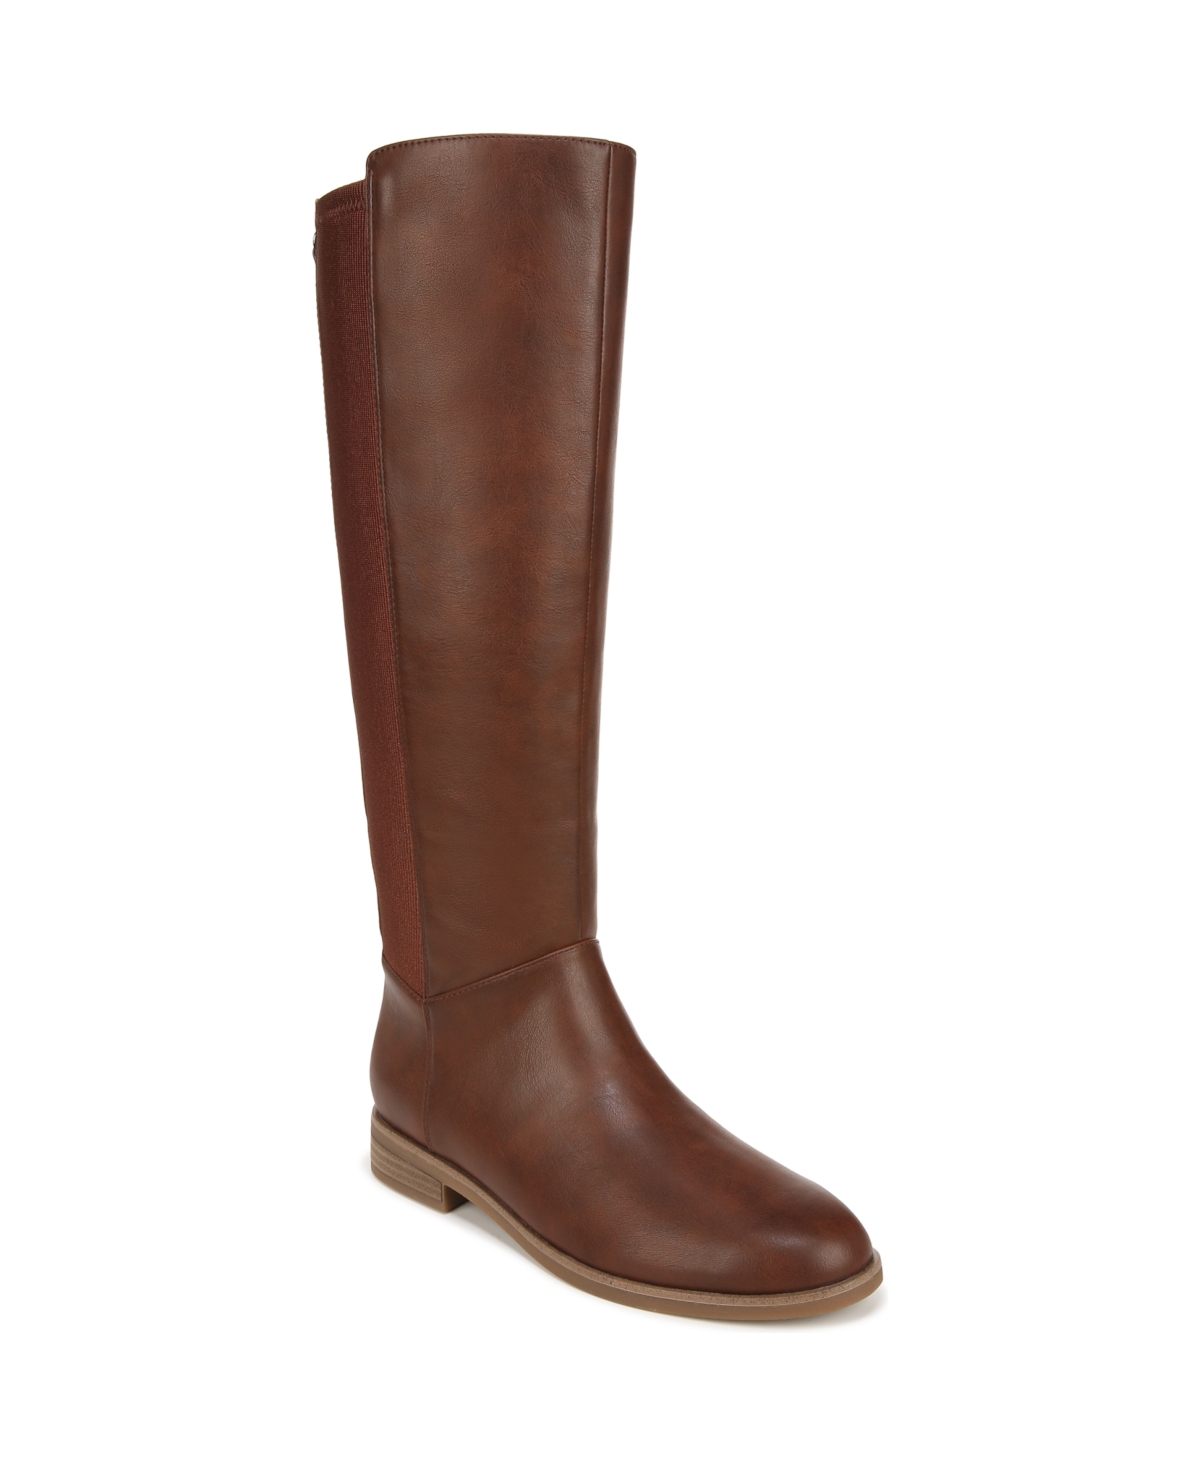 Women's Astir Zip High Shaft Boots - Brown Faux Leather/Fabric